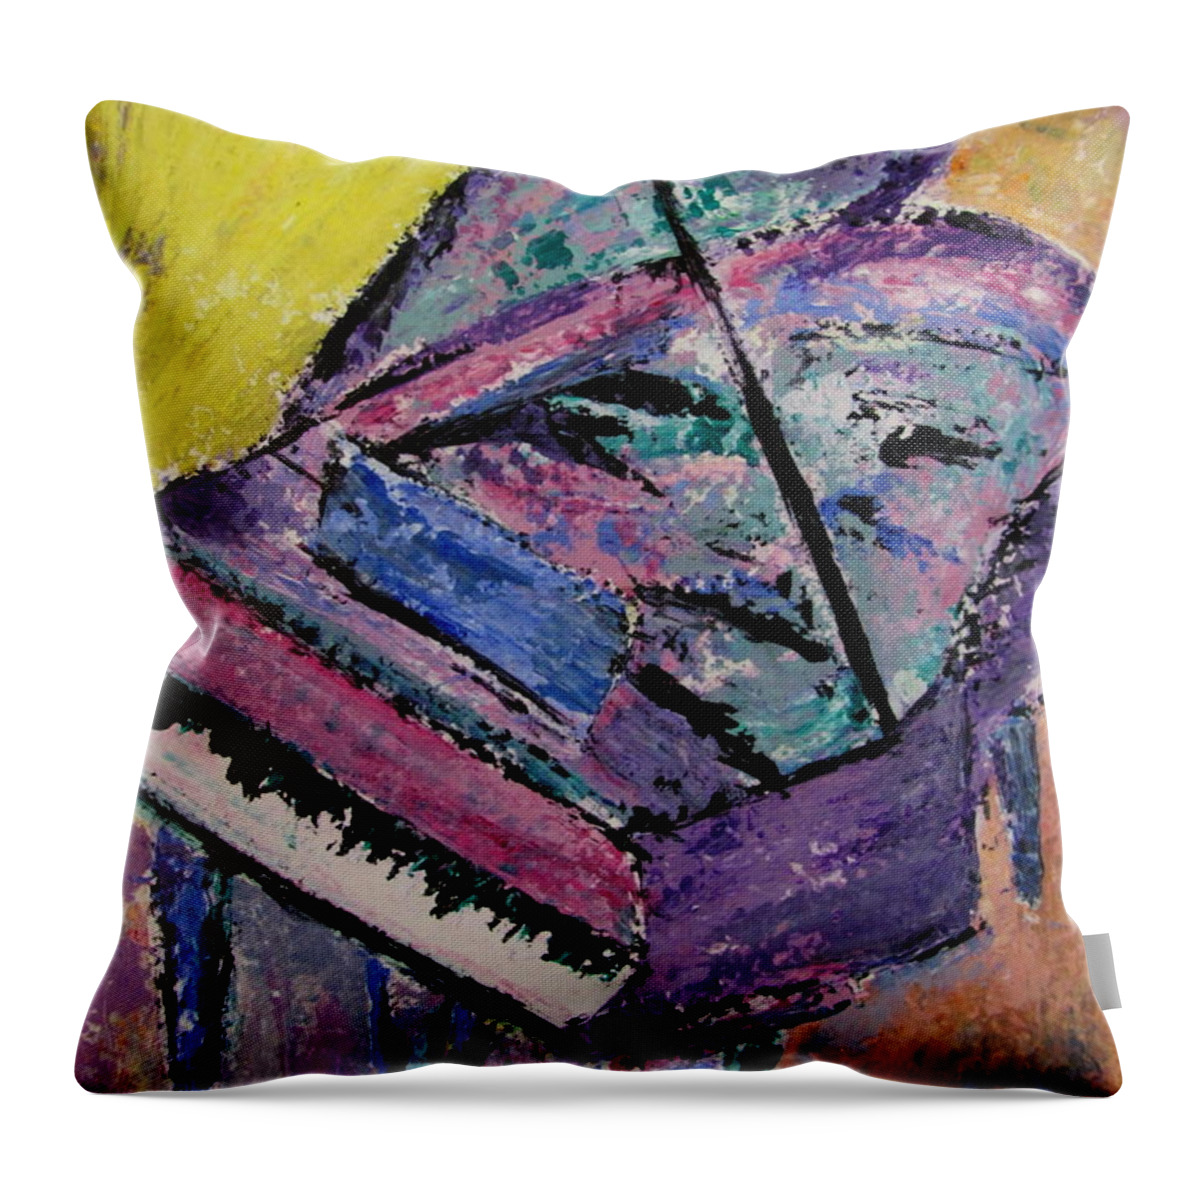 Piano Throw Pillow featuring the painting Piano Pink by Anita Burgermeister